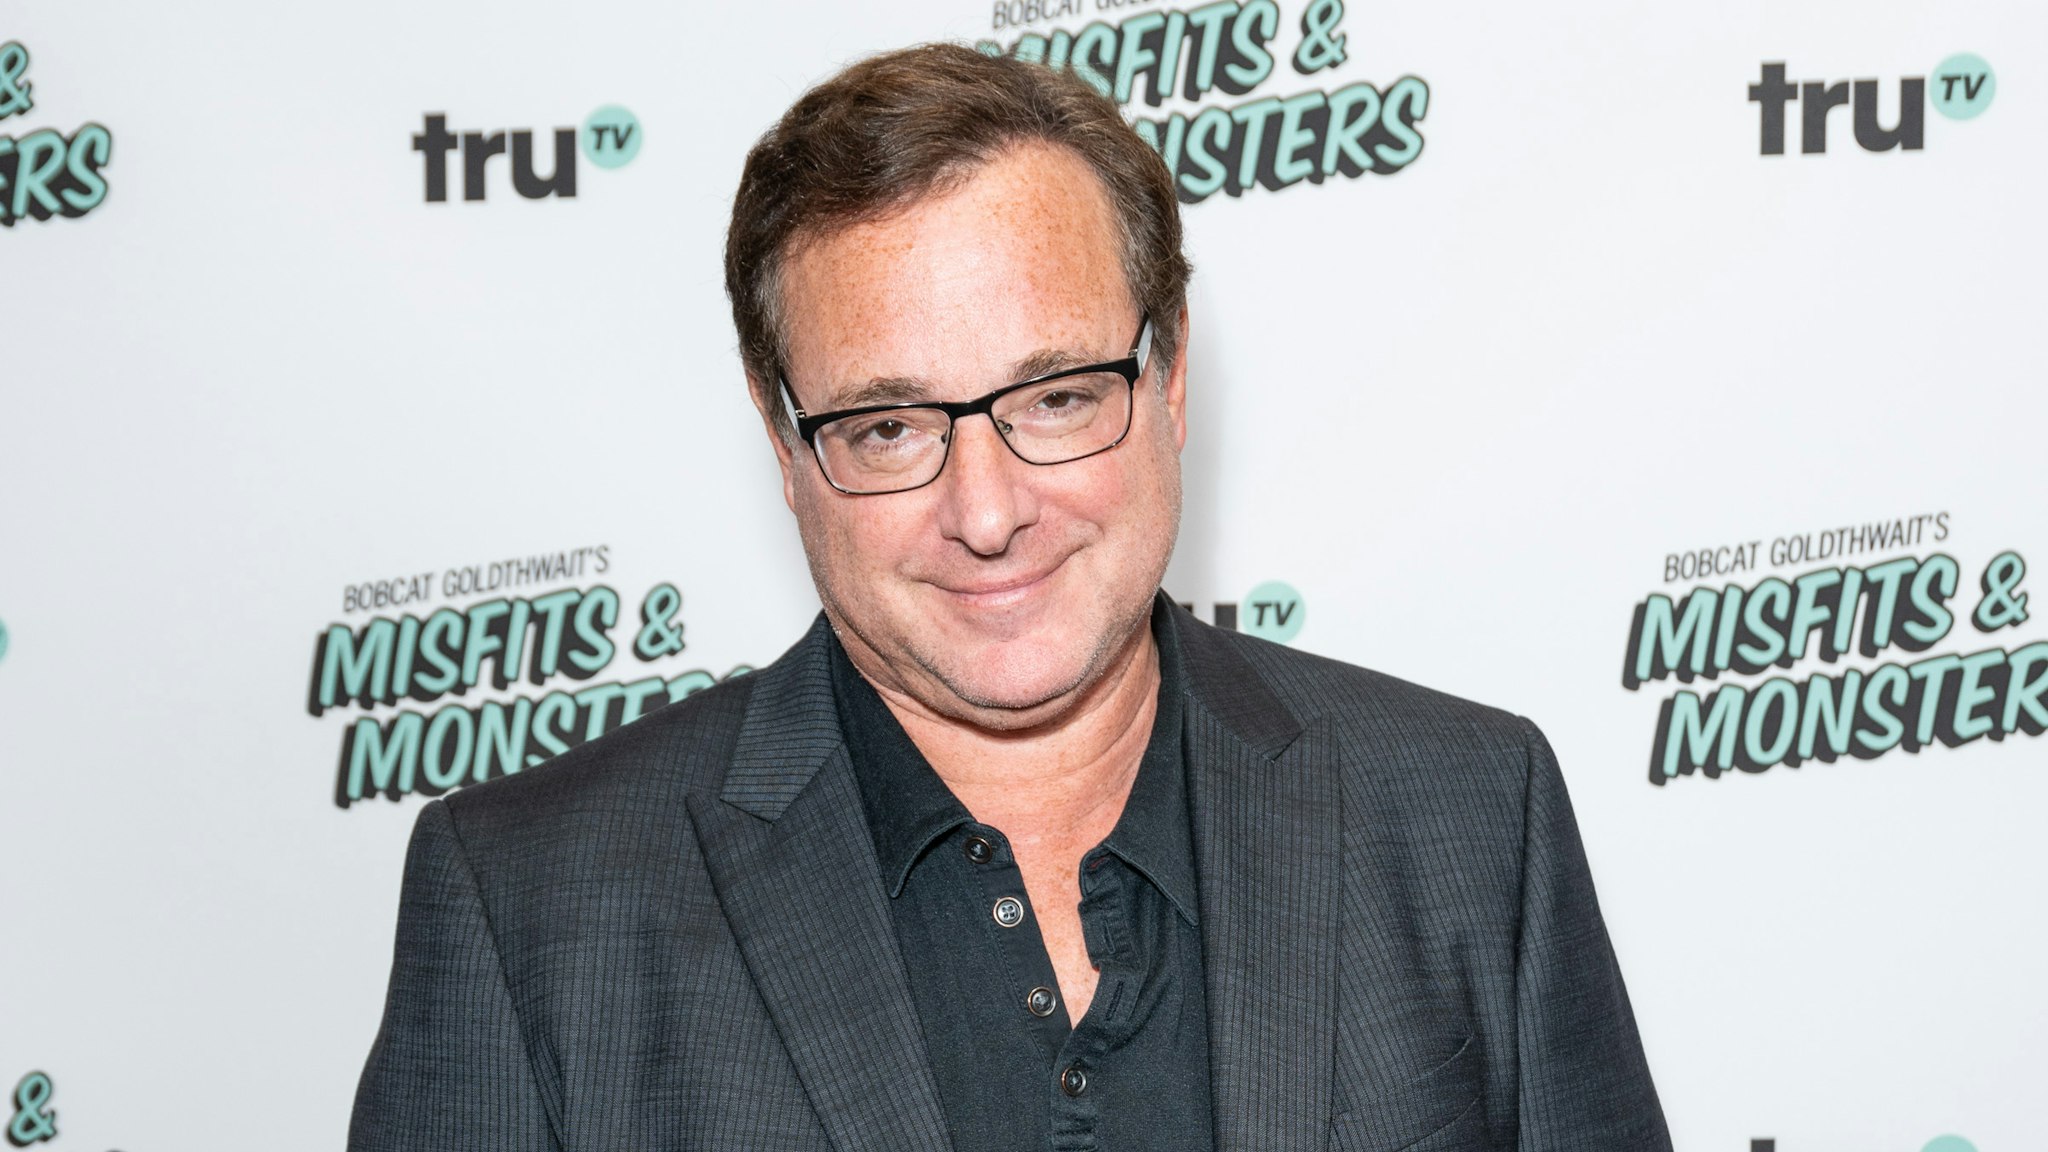 HOLLYWOOD, CA - JULY 11: Bob Saget attends the premiere of truTV's "Bobcat Goldthwait's Misfits &amp; Monsters" at Hollywood Roosevelt Hotel on July 11, 2018 in Hollywood, California.